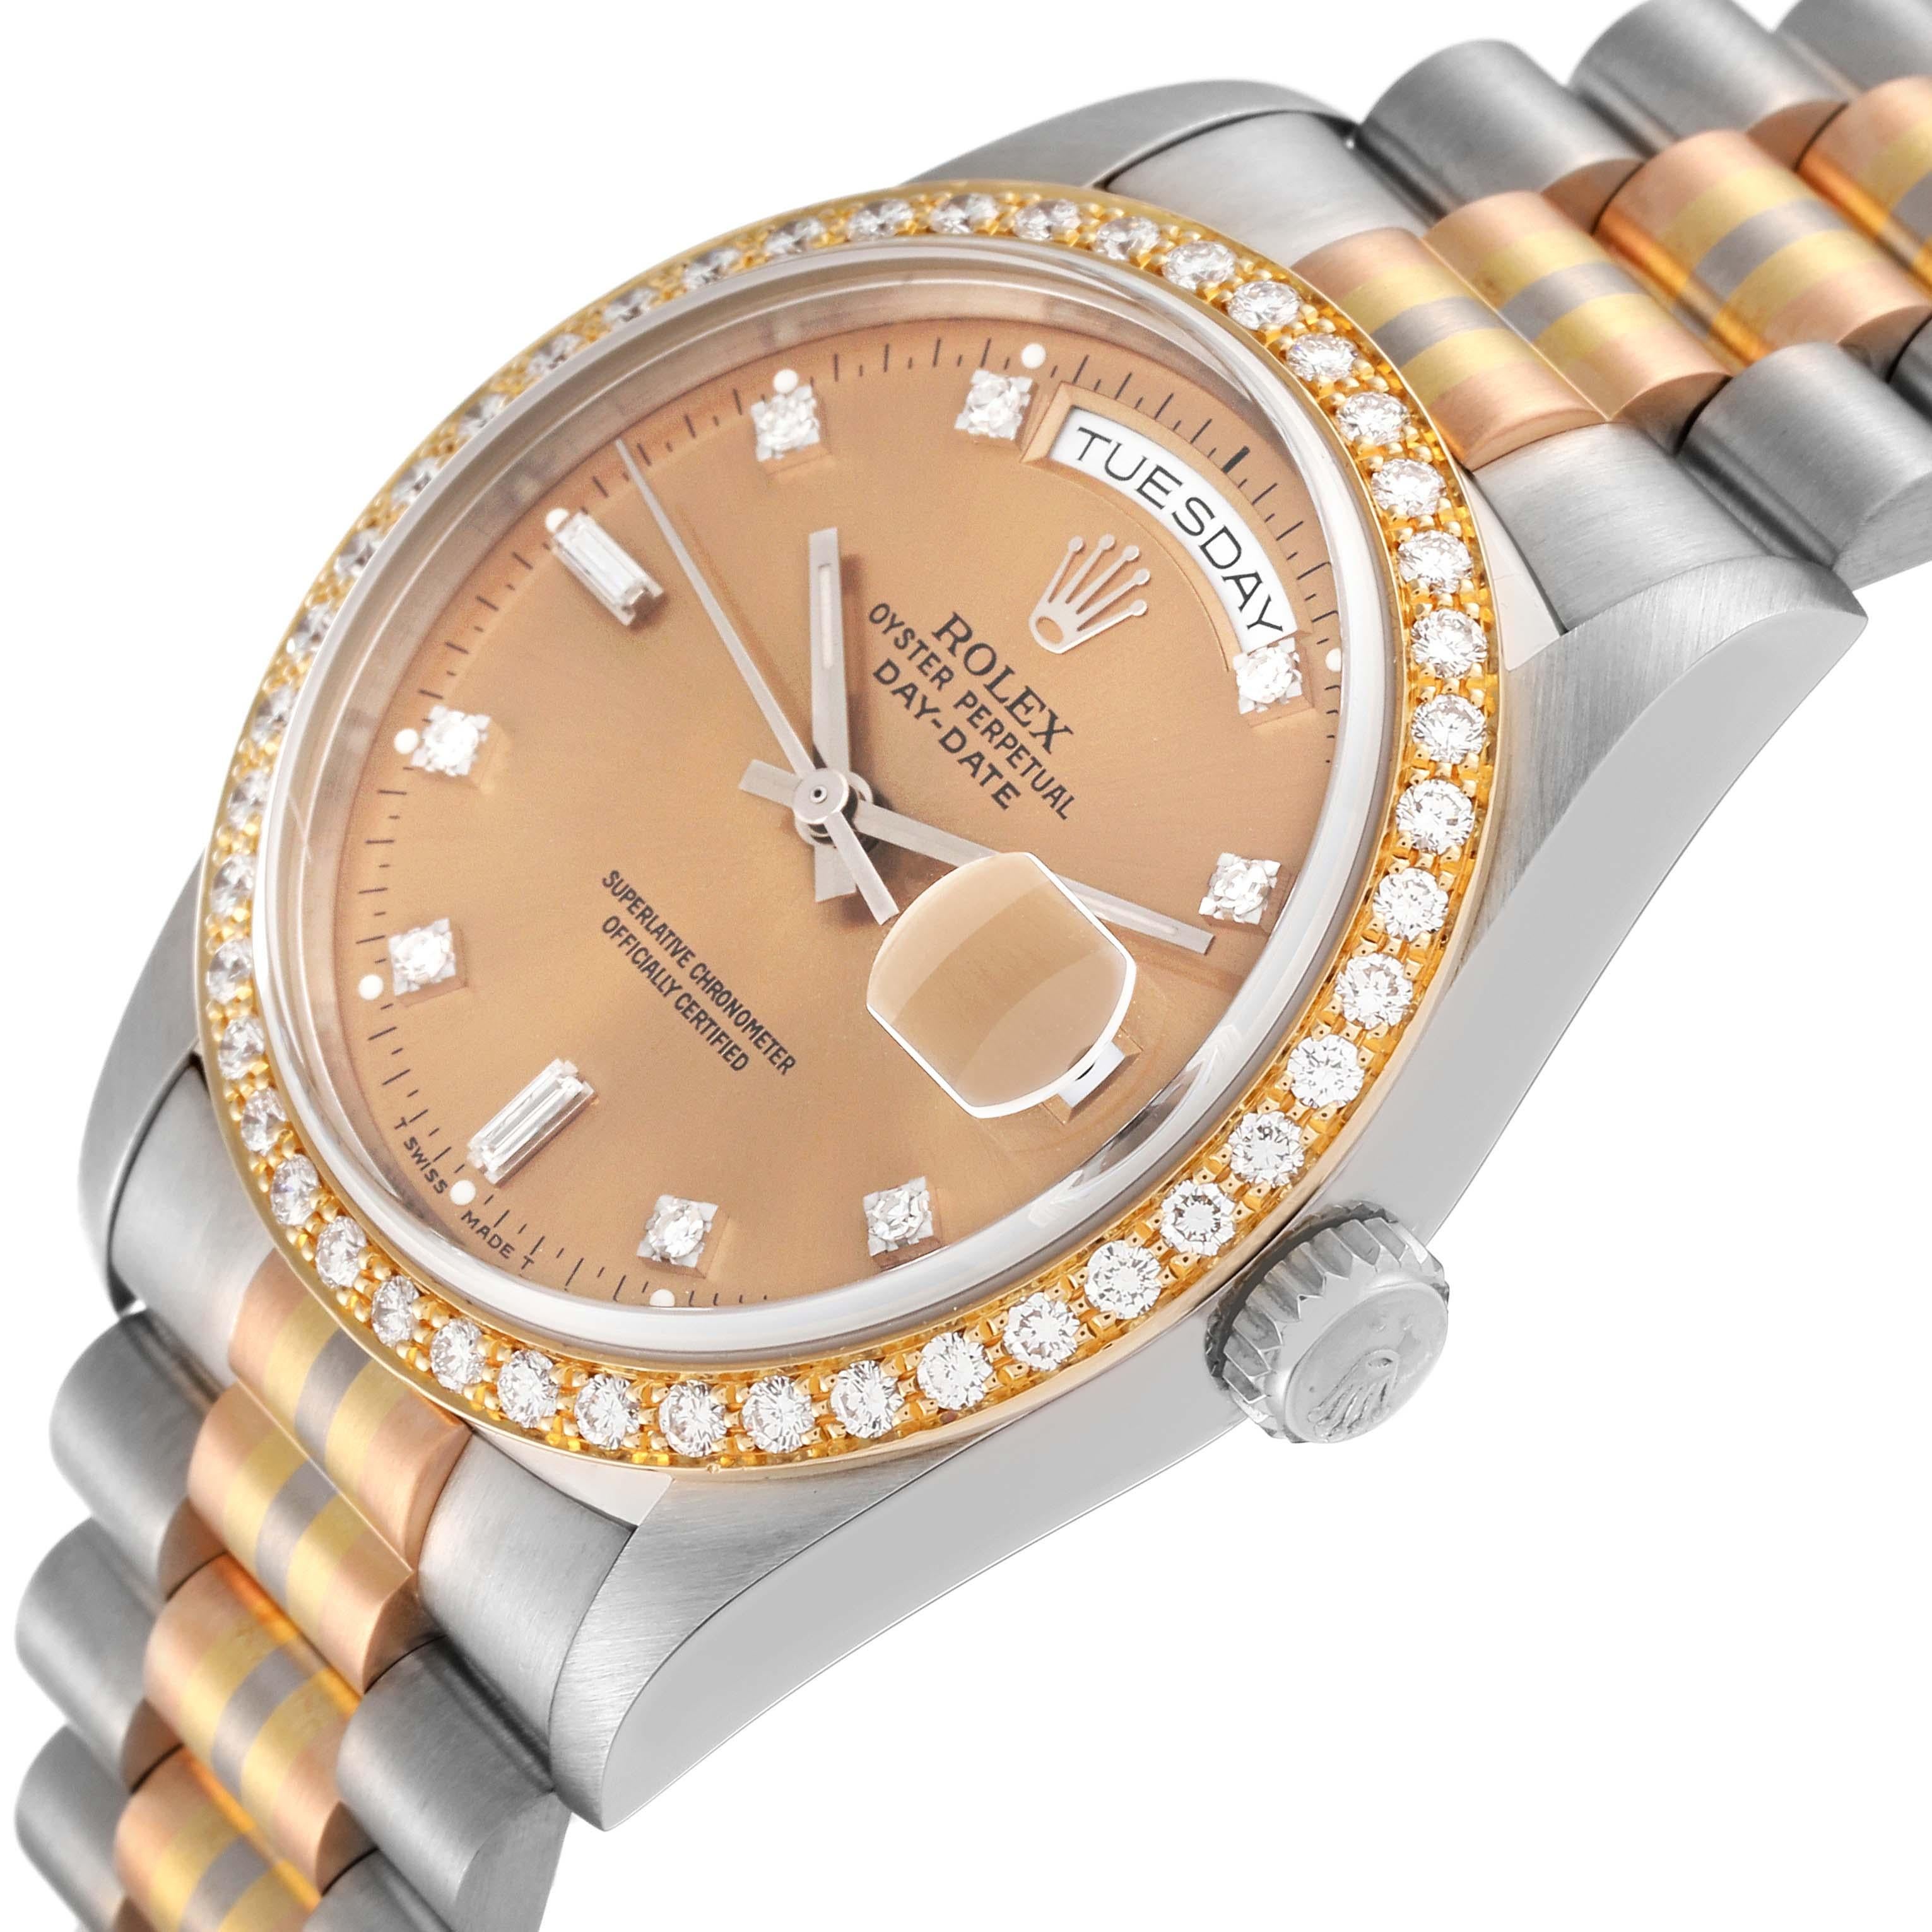 Rolex President Day-Date Tridor White Yellow Rose Gold Diamond Mens Watch 18349 In Excellent Condition For Sale In Atlanta, GA